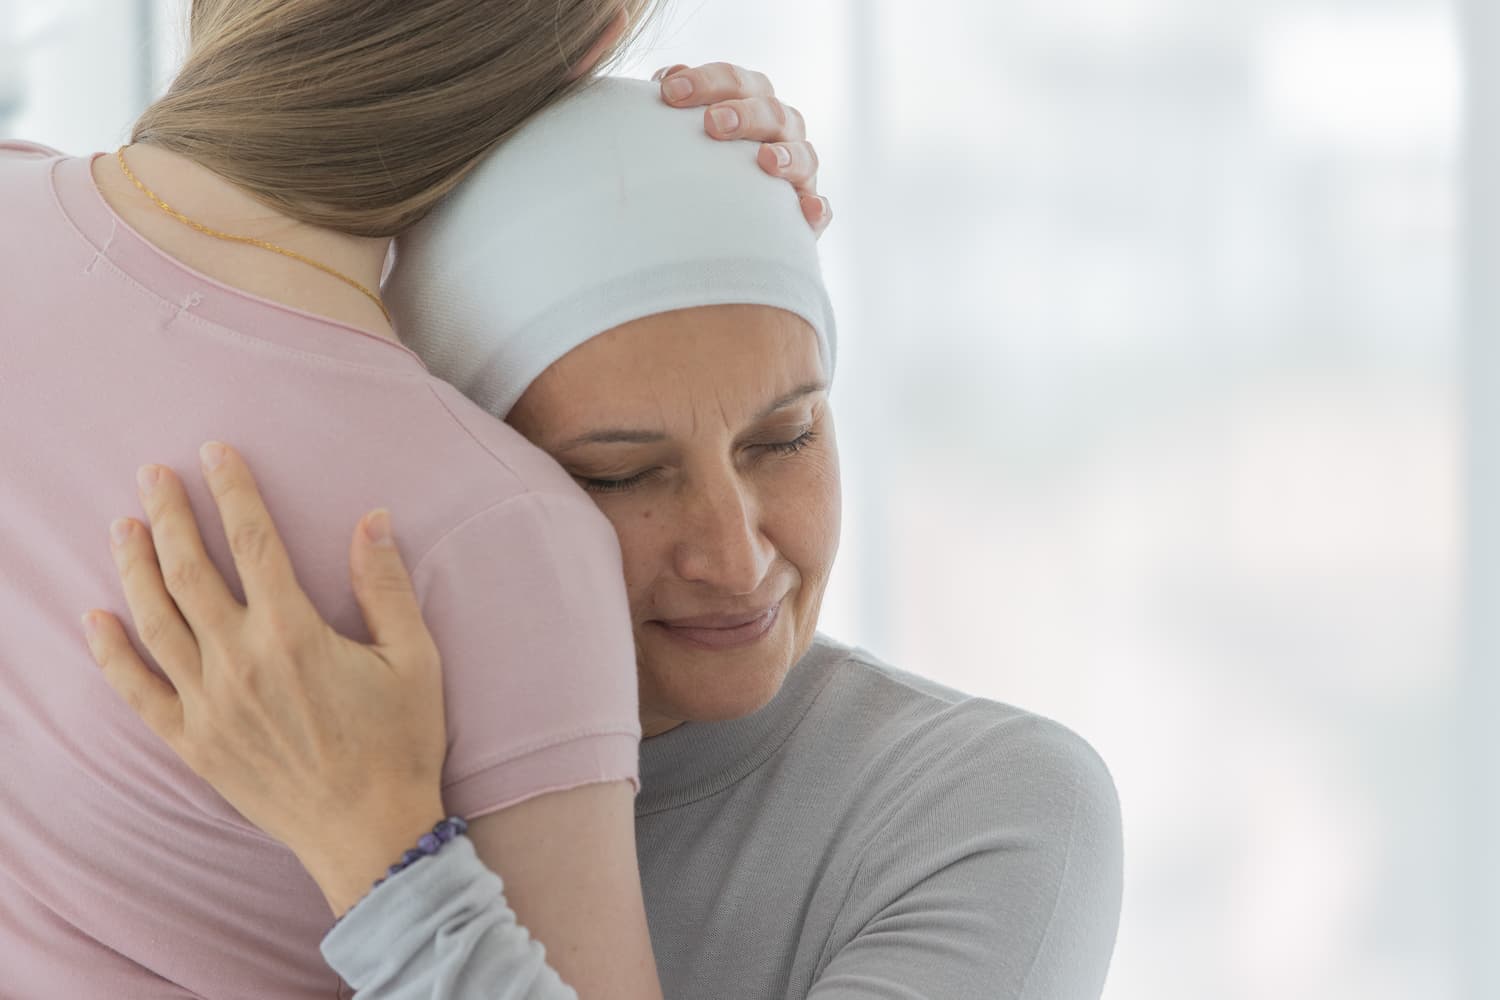 49. A middle-aged breast cancer woman hug and cuddle her daughter (1)